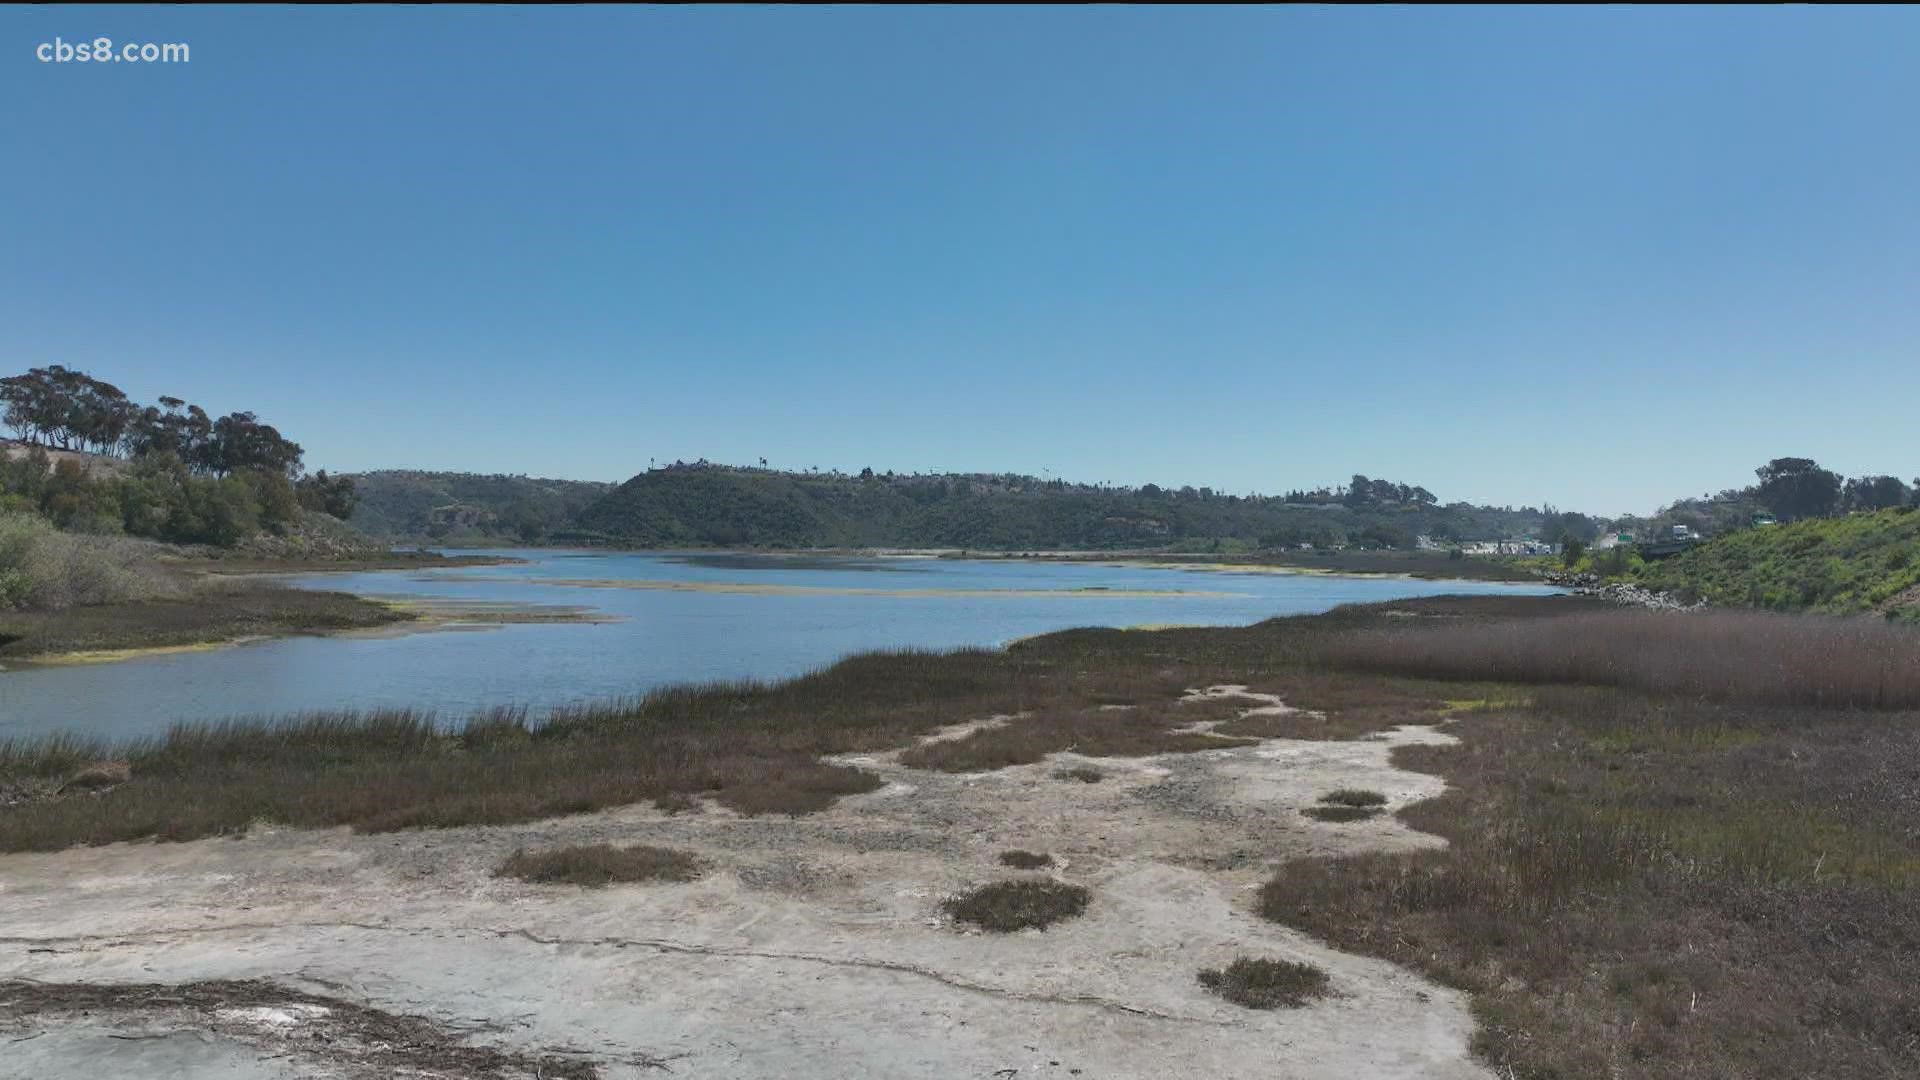 Scientists at the Salk Institute in La Jolla are taking a new approach and studying the generic makeup of wetland plants to fight climate change.